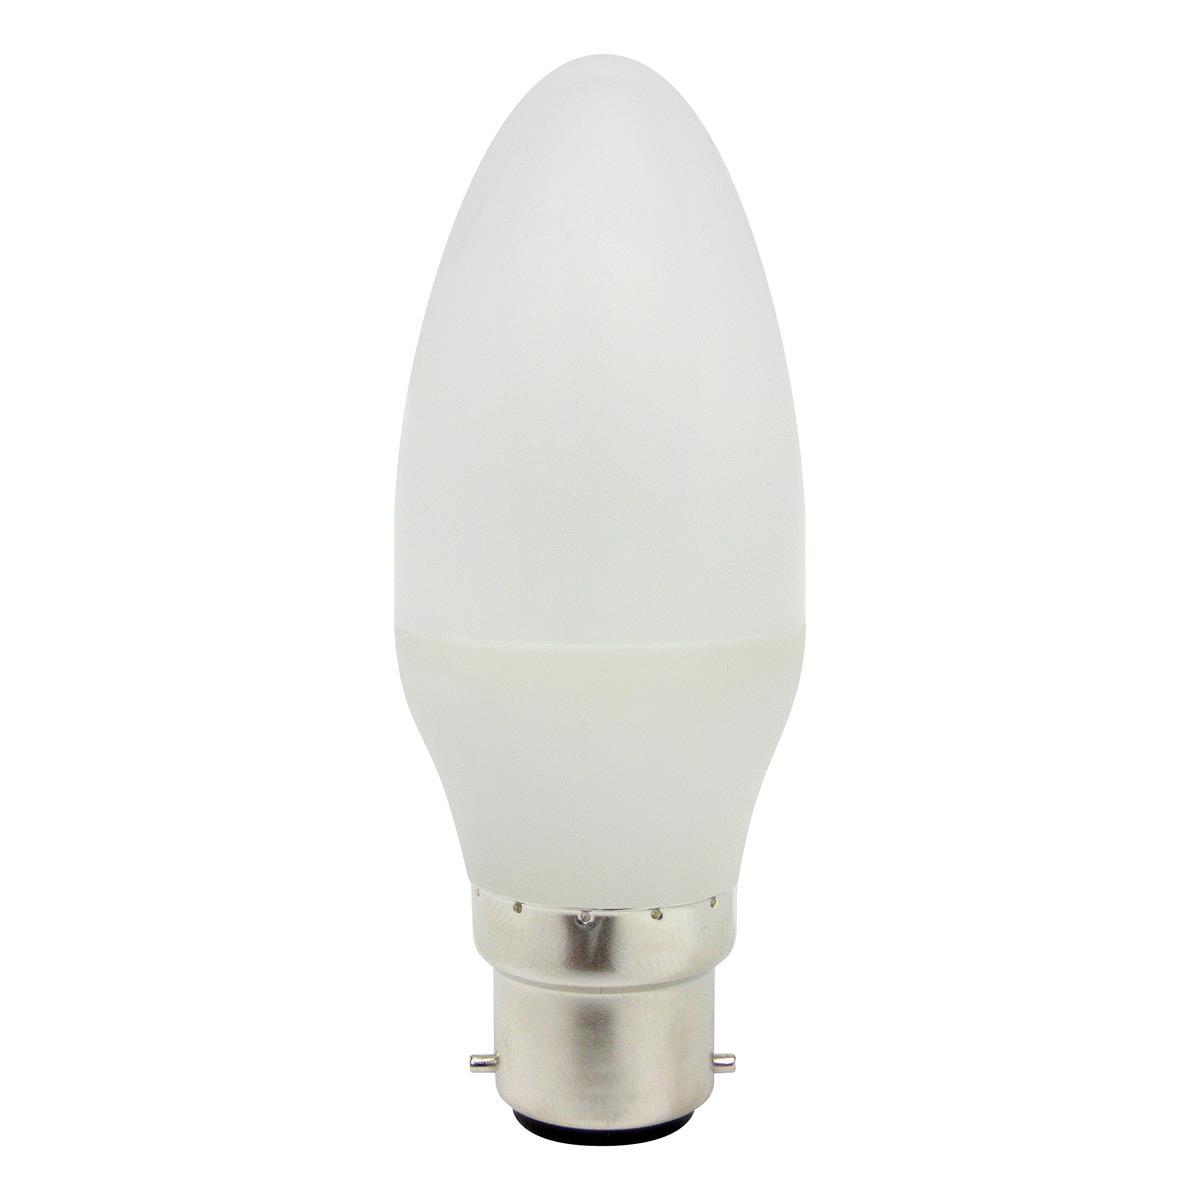 PowerPlus - 6W LED Candle B22/BC Daylight Candle Bulbs | Snape & Sons